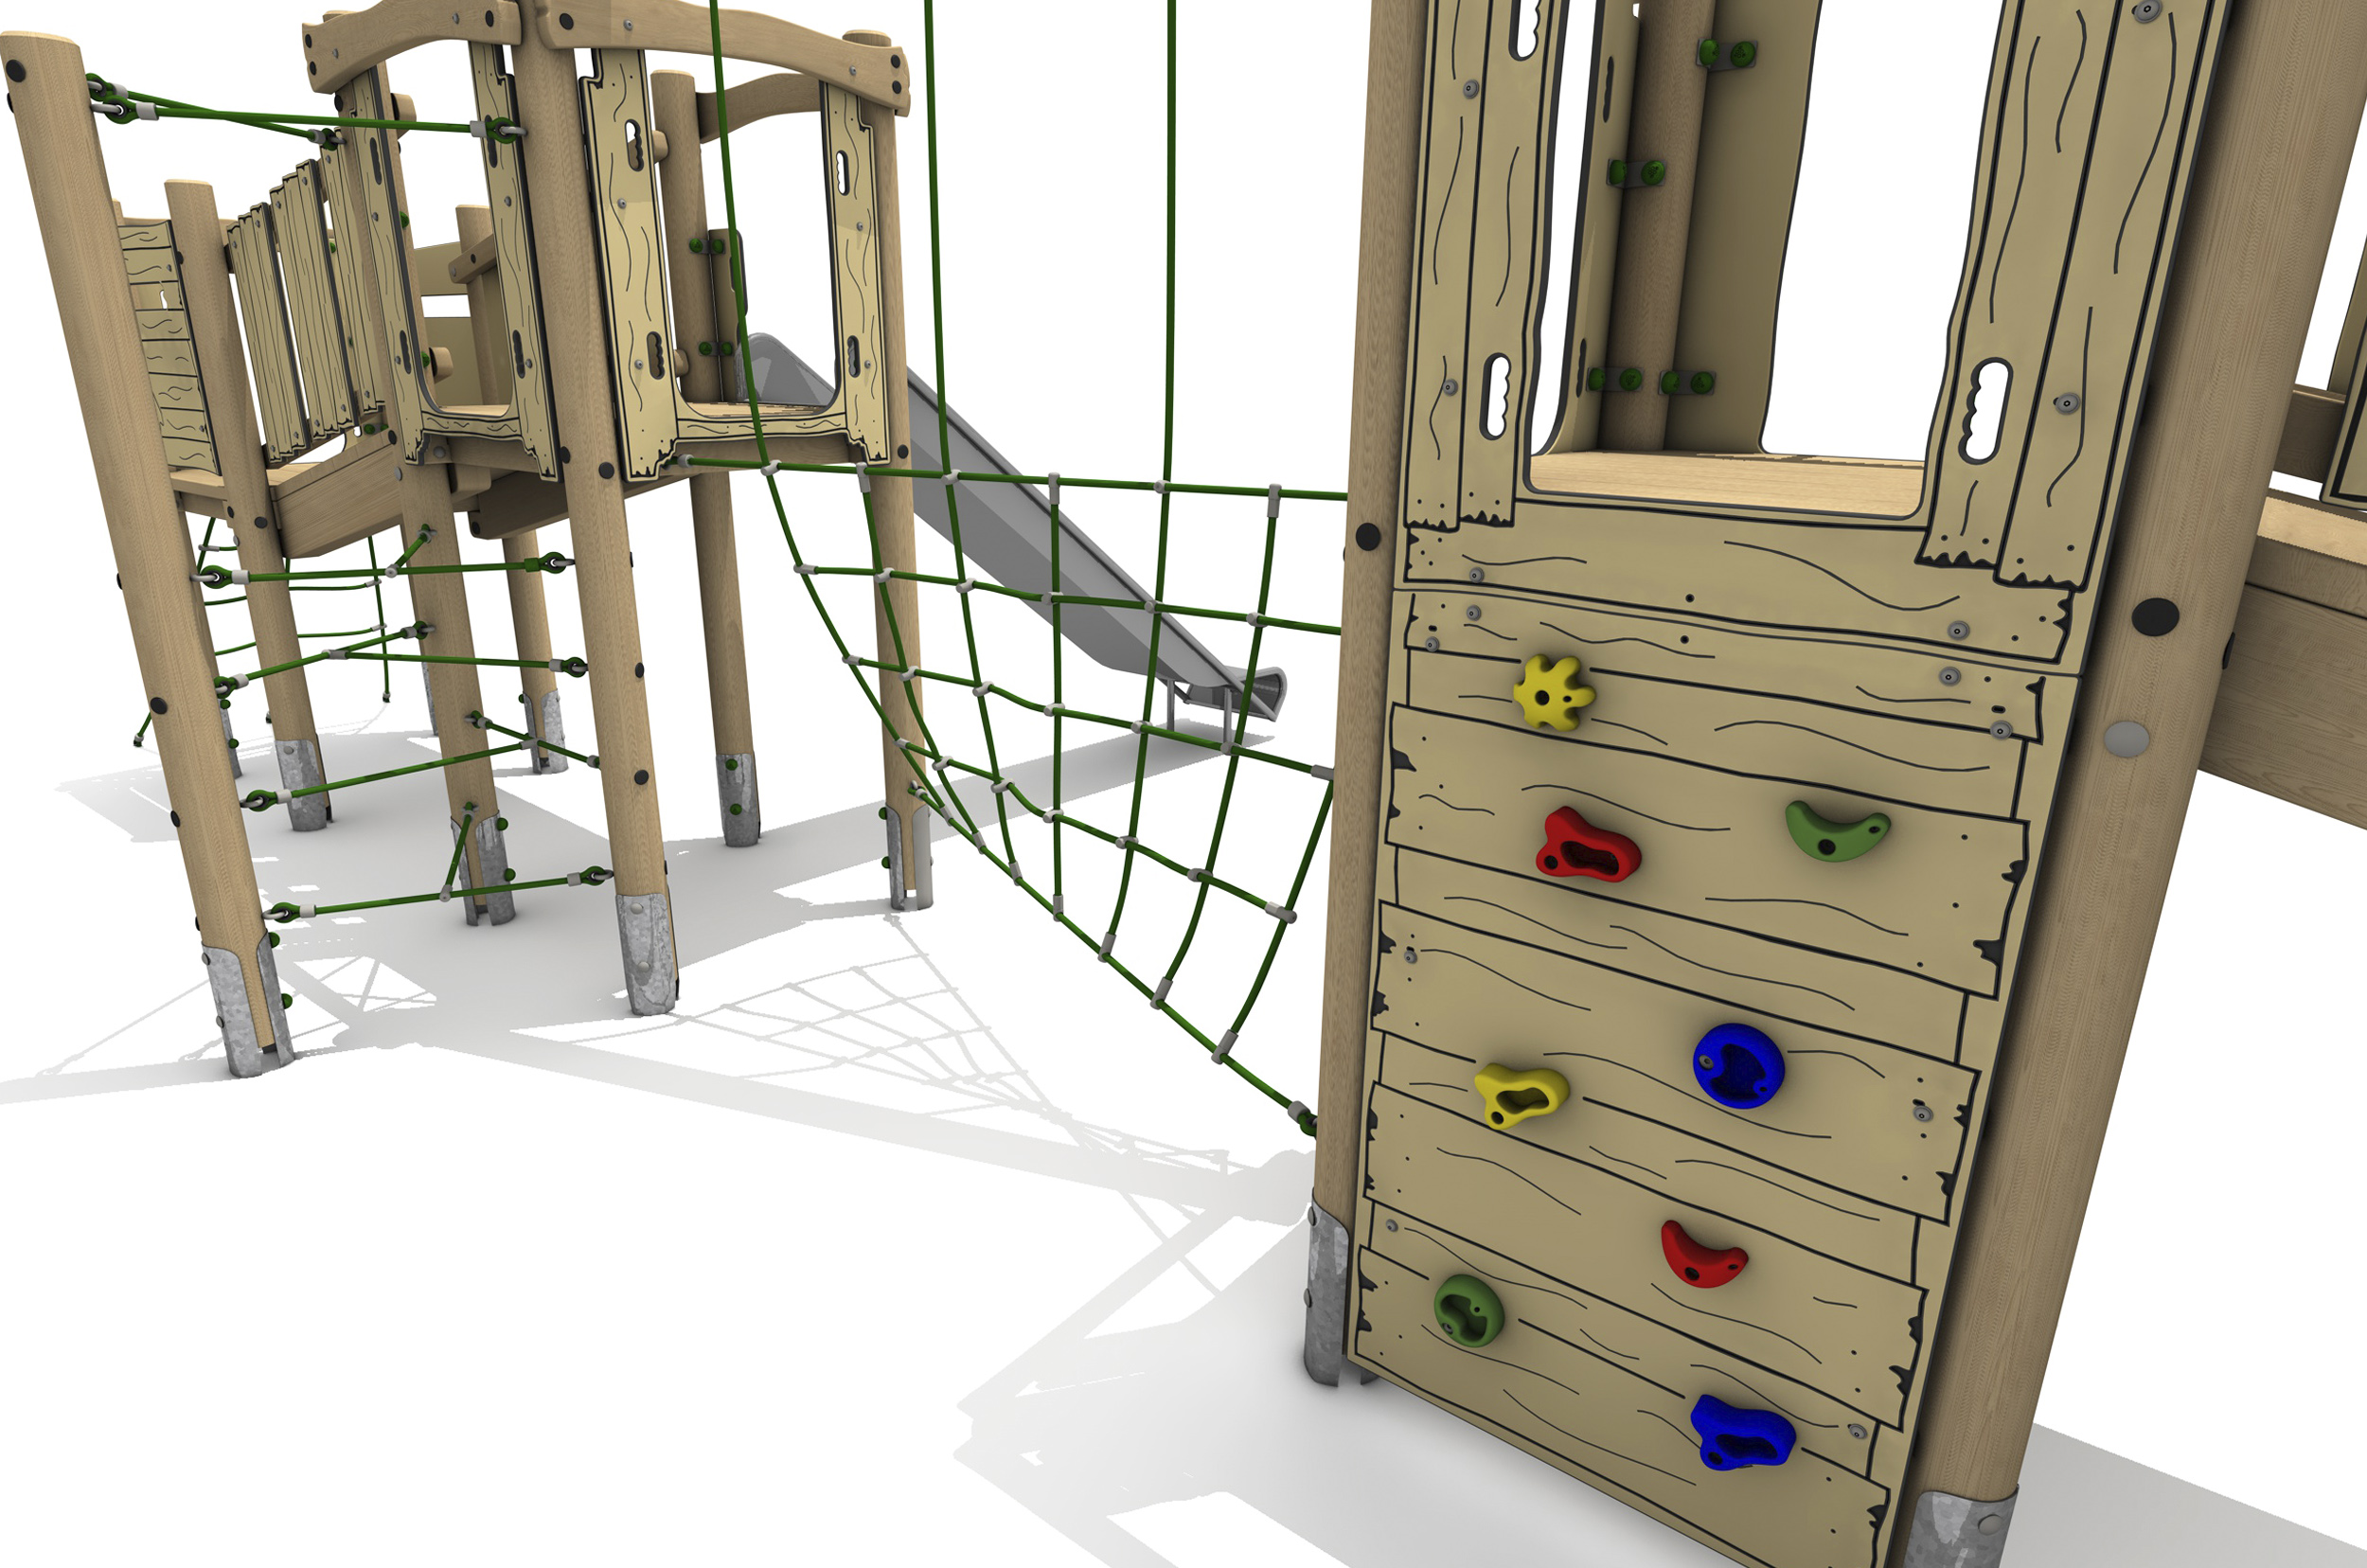 Timber Tower Four Deck 04, A timber tower climber with steel slide. On the left there is vertical climb wall with multicoloured hand and foot holds leading up to the platform. A central green rope twisted traverse net leads to the platform on the left, this is accessed by a green T-rope climber.